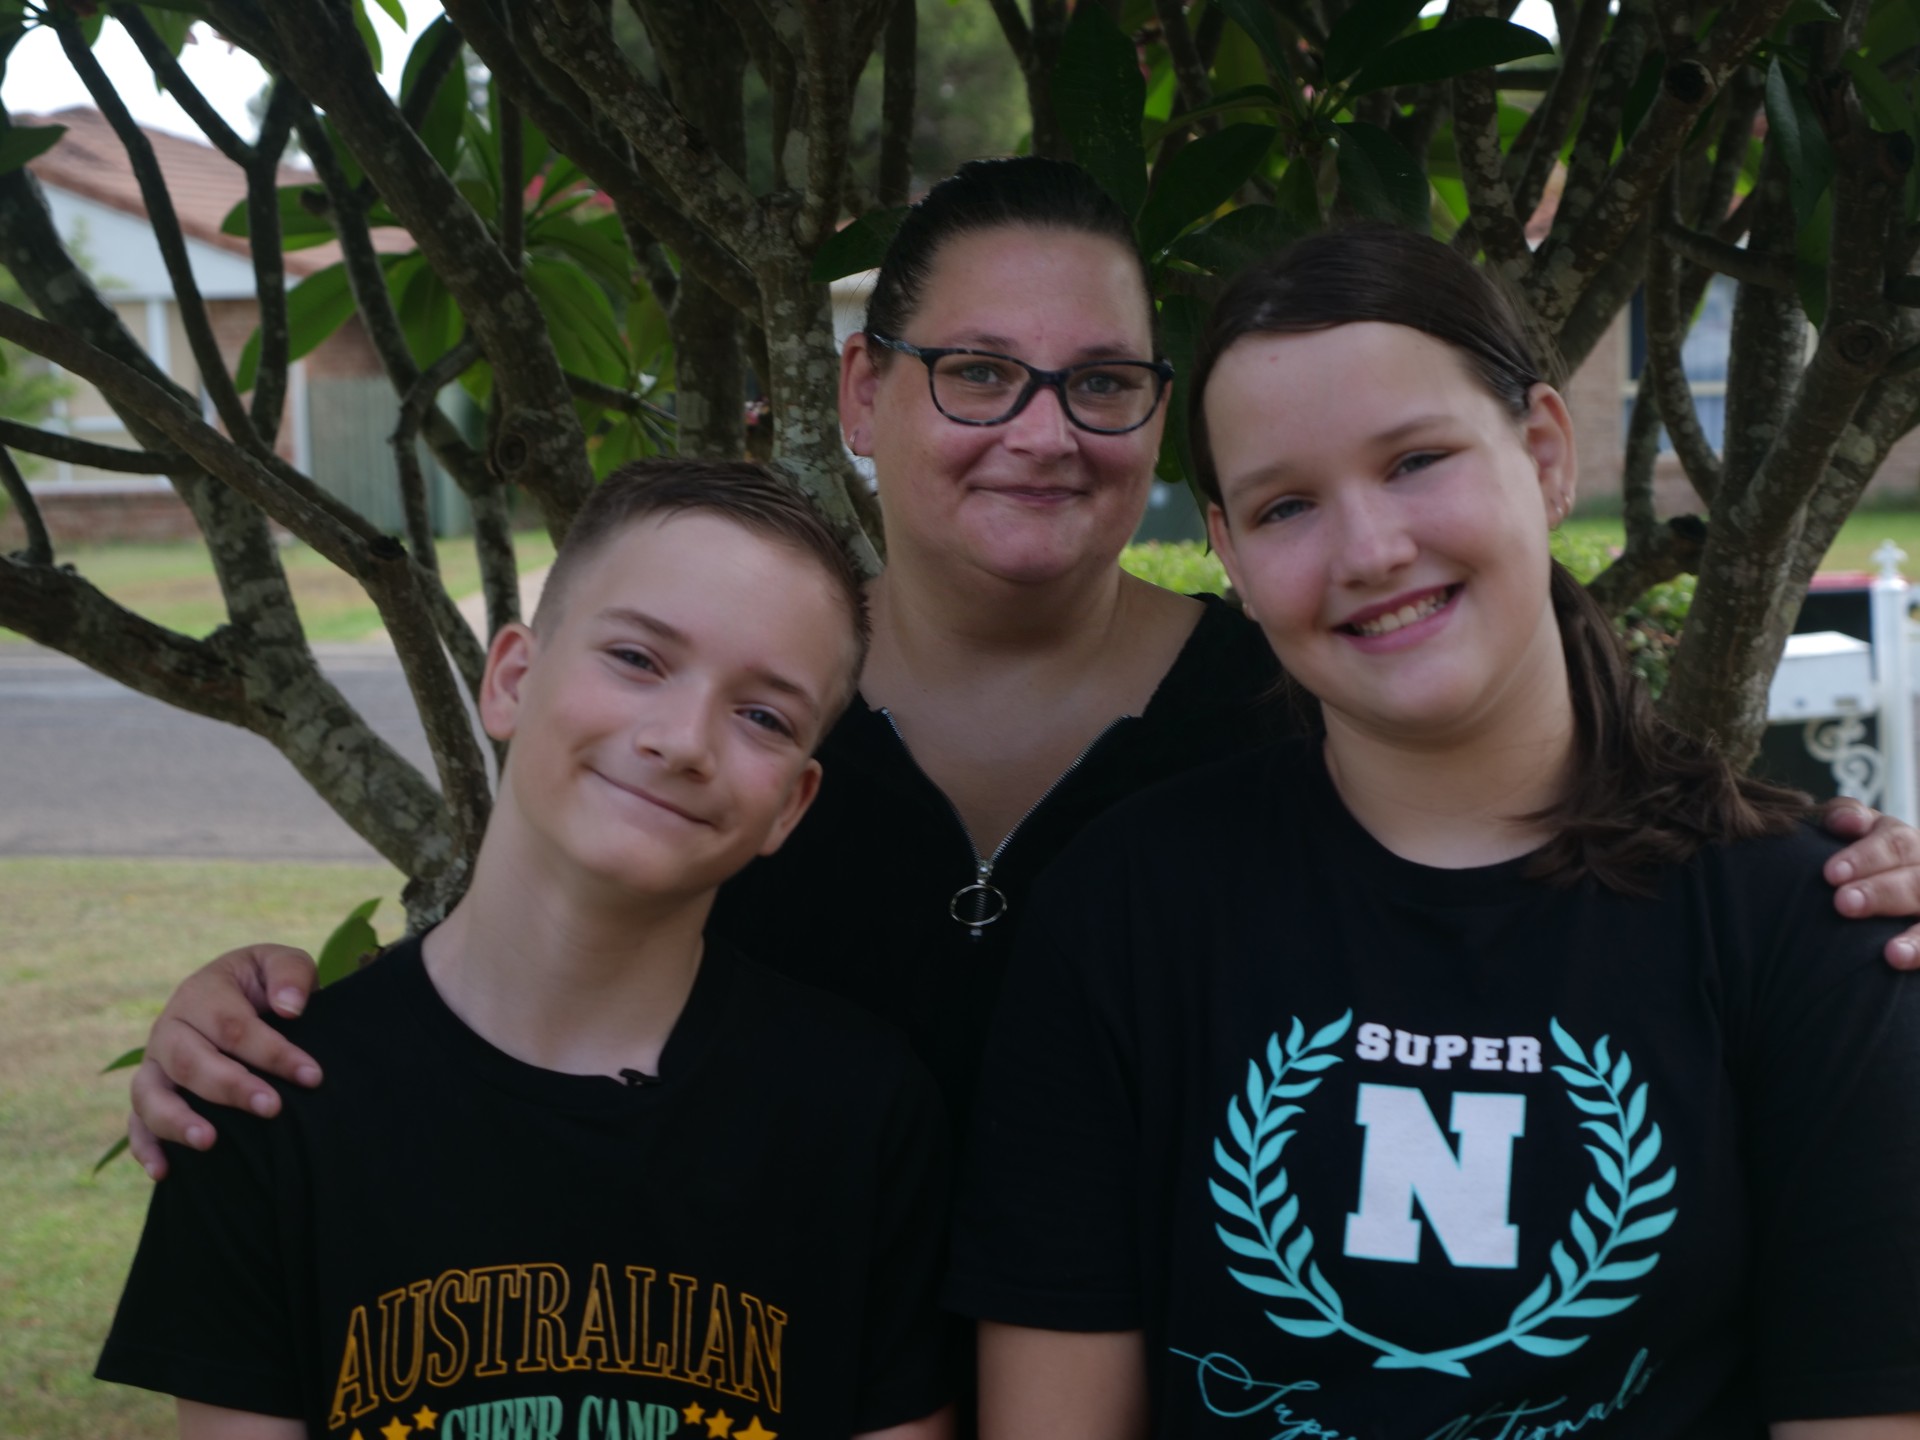 Mother and two teenage children smiling in front of a tree.